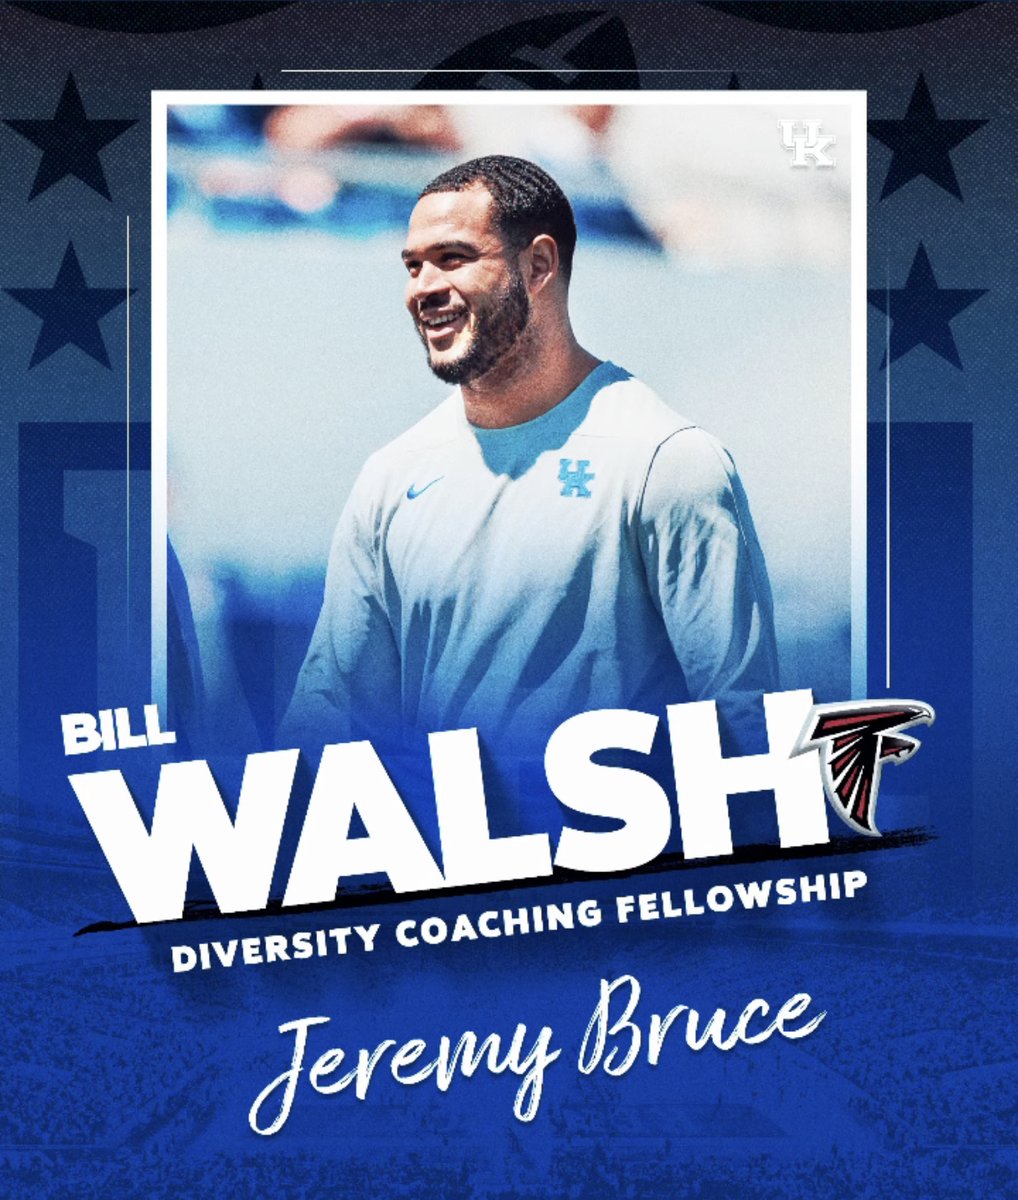 Congratulations to #NCMFC member @Coach_JBruce  for being selected for the @AtlantaFalcons Bill Walsh Diversity Coaching Fellowship!

#JoinTheCoalition
#PreparePromoteProduce